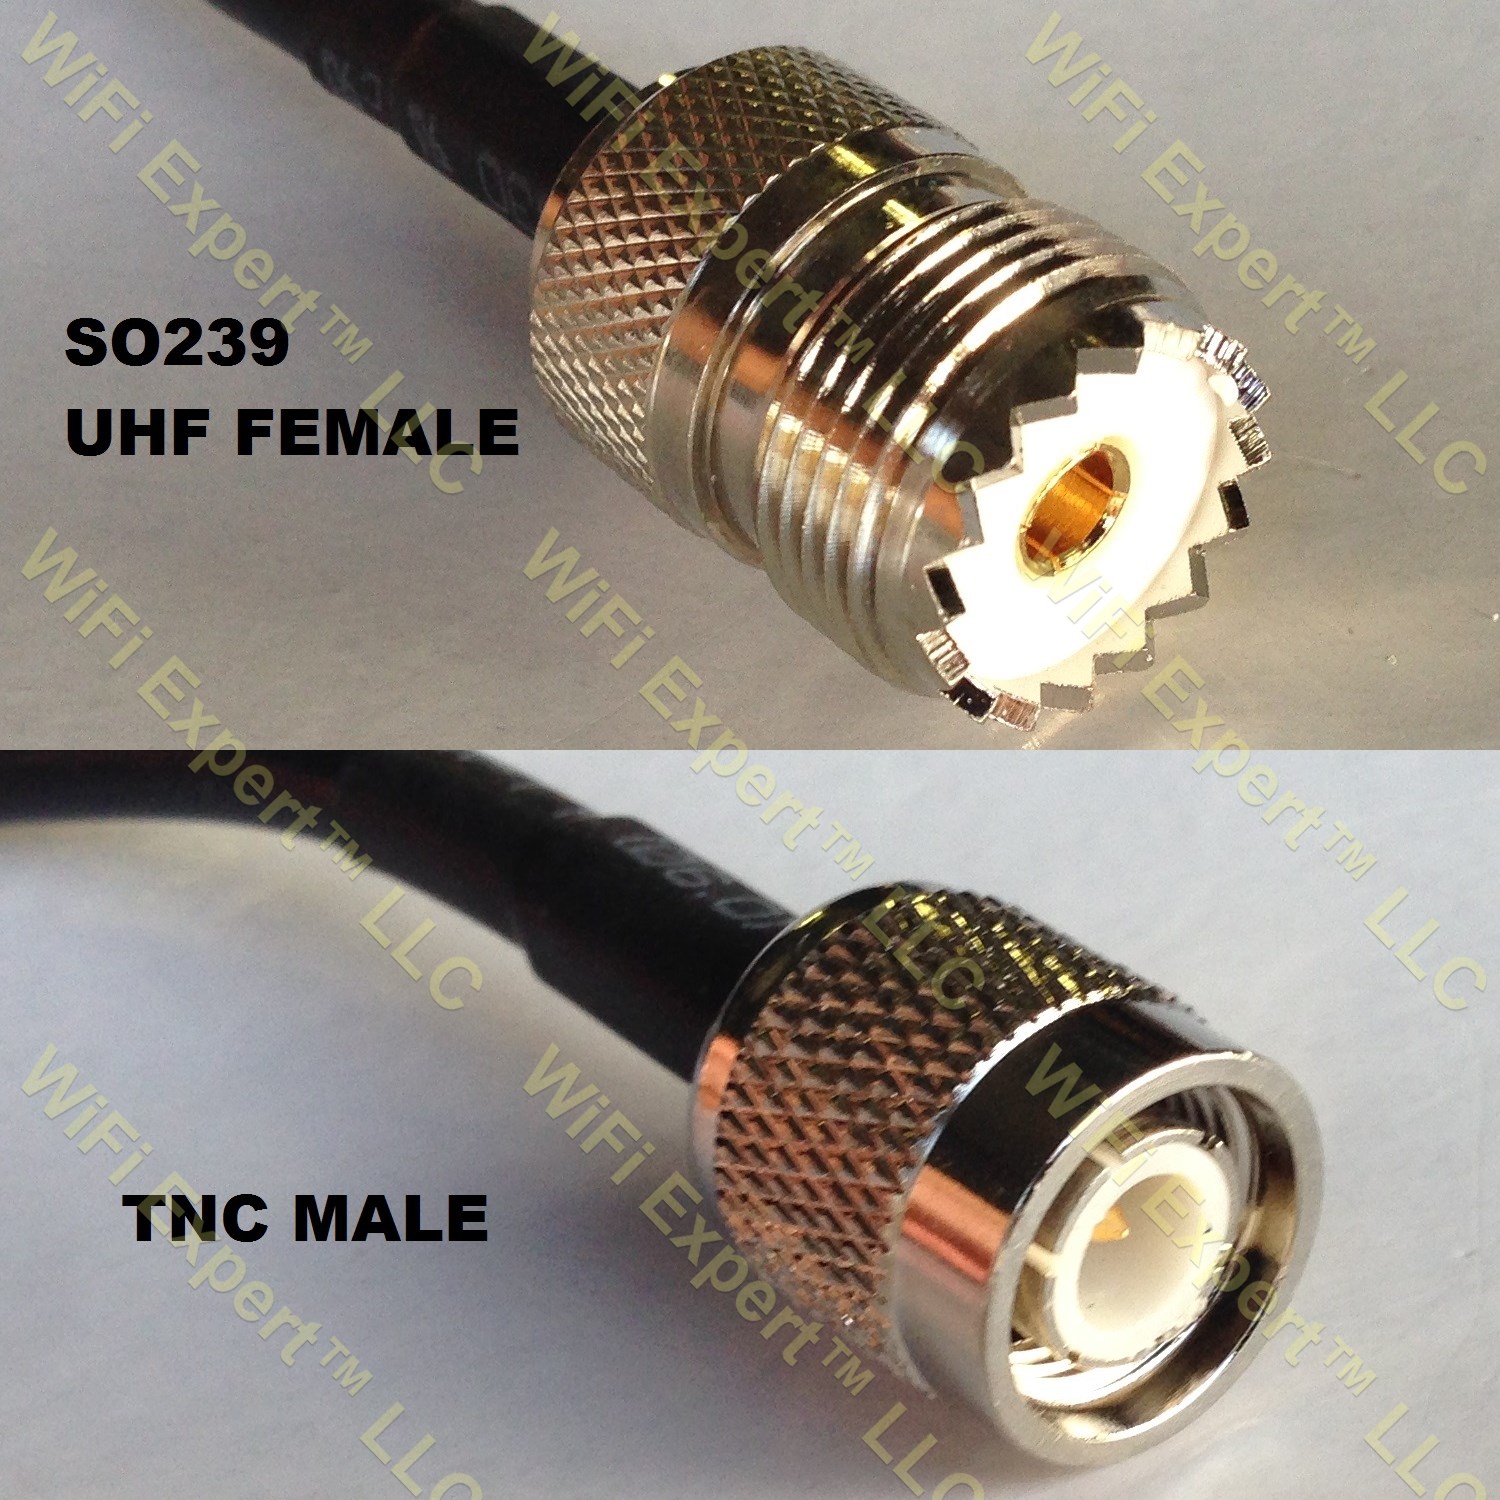 UHF SO239 Female to TNC MALE RF pigtail Cable COAX RG316 4-20inch USA Assembled 